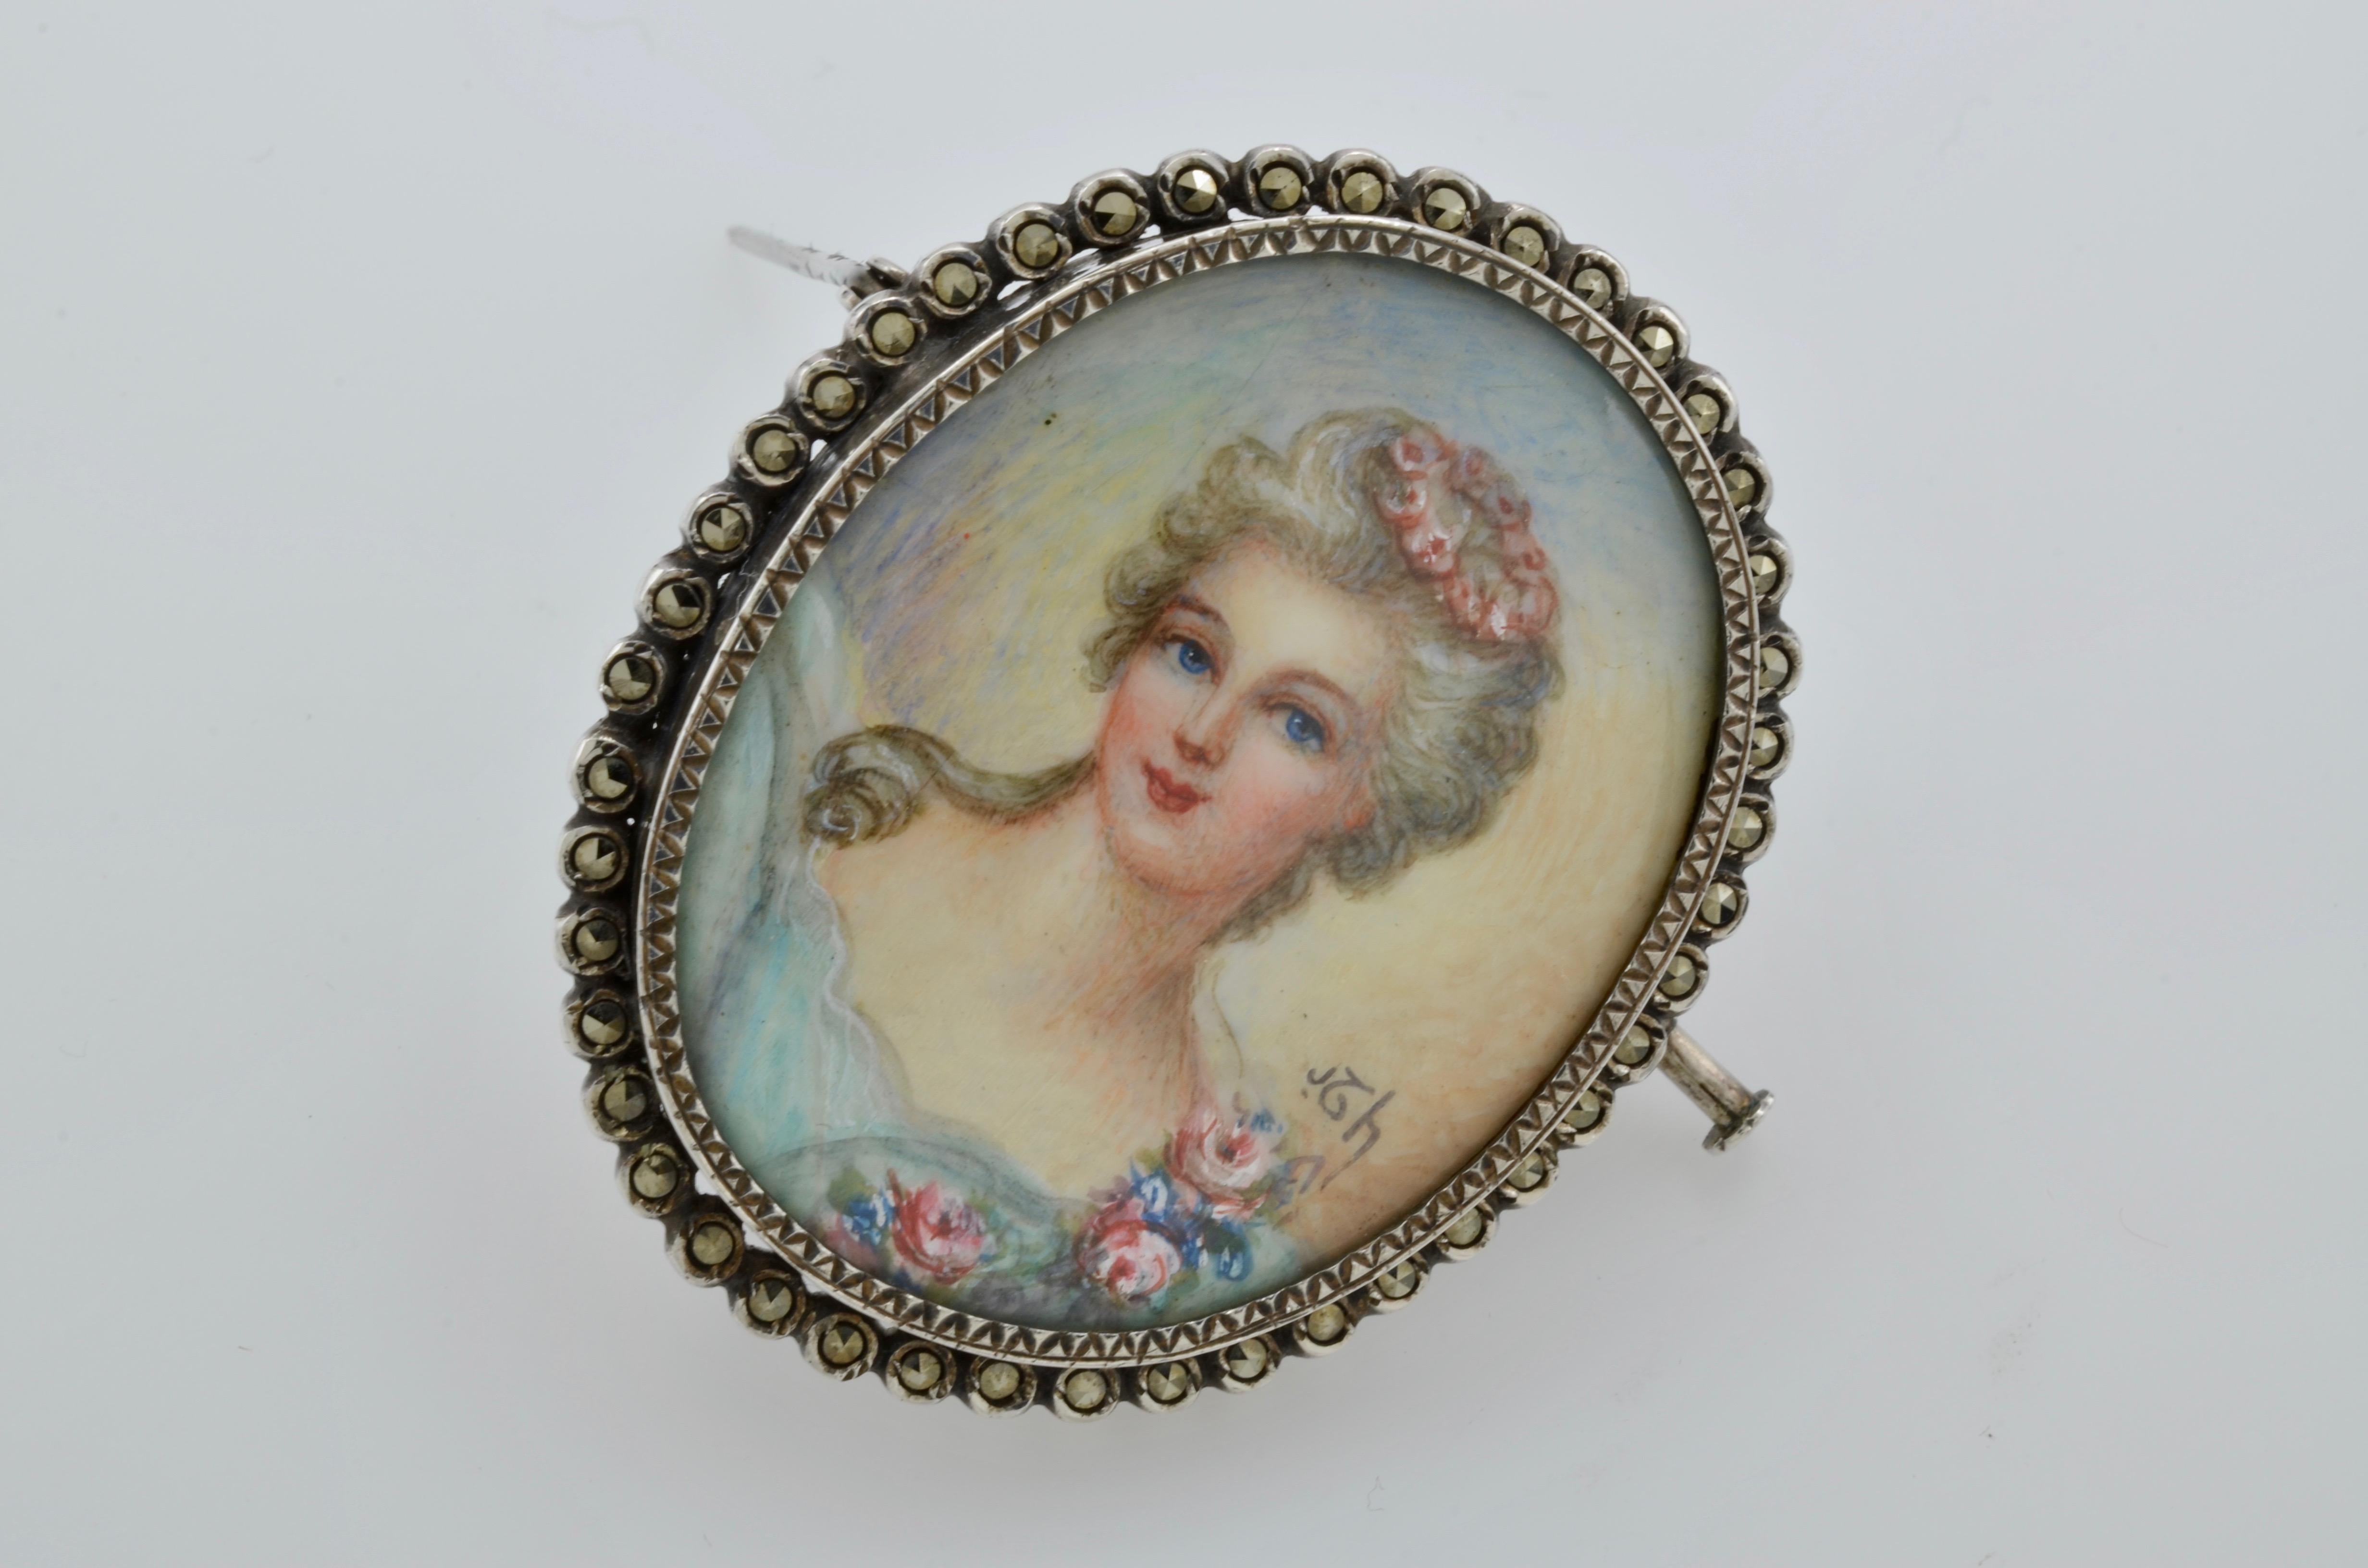 This French hand painted portrait of a lady brooch was made around the 1850's in the style of the 1700's. A halo of marcasite surrounds this beautiful woman. The delicate detail of the portrait creates an illustrious maiden with rosy cheeks and